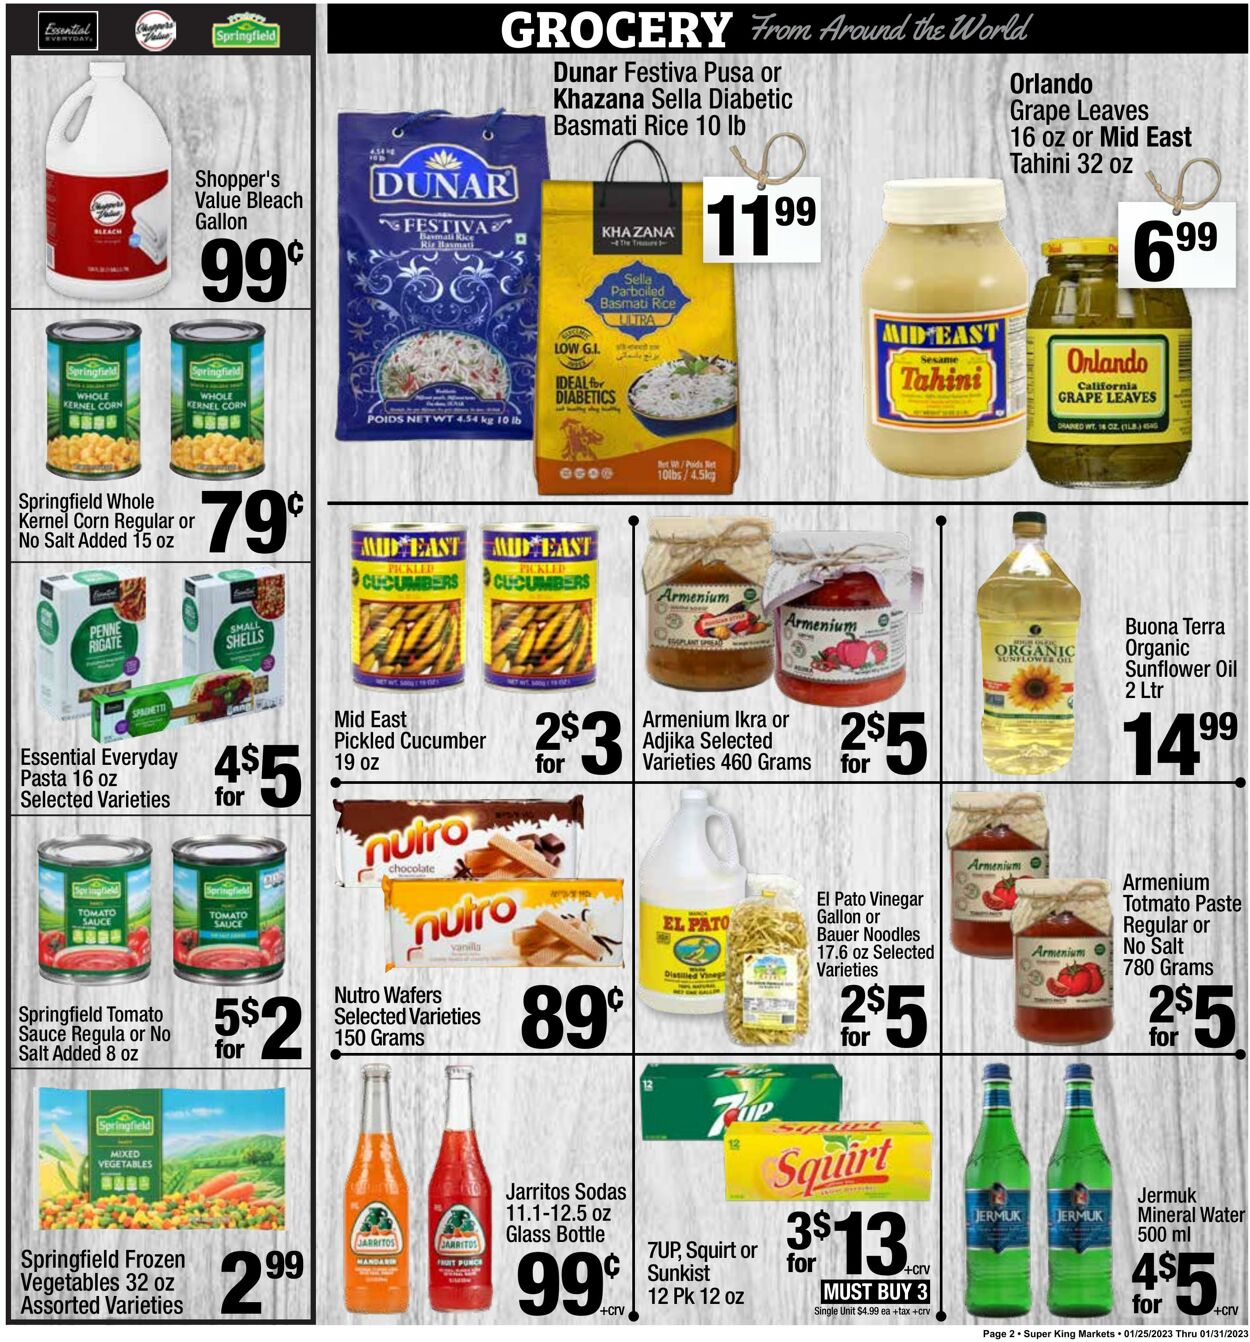 Weekly ad Super King Markets 01/25/2023 - 01/31/2023